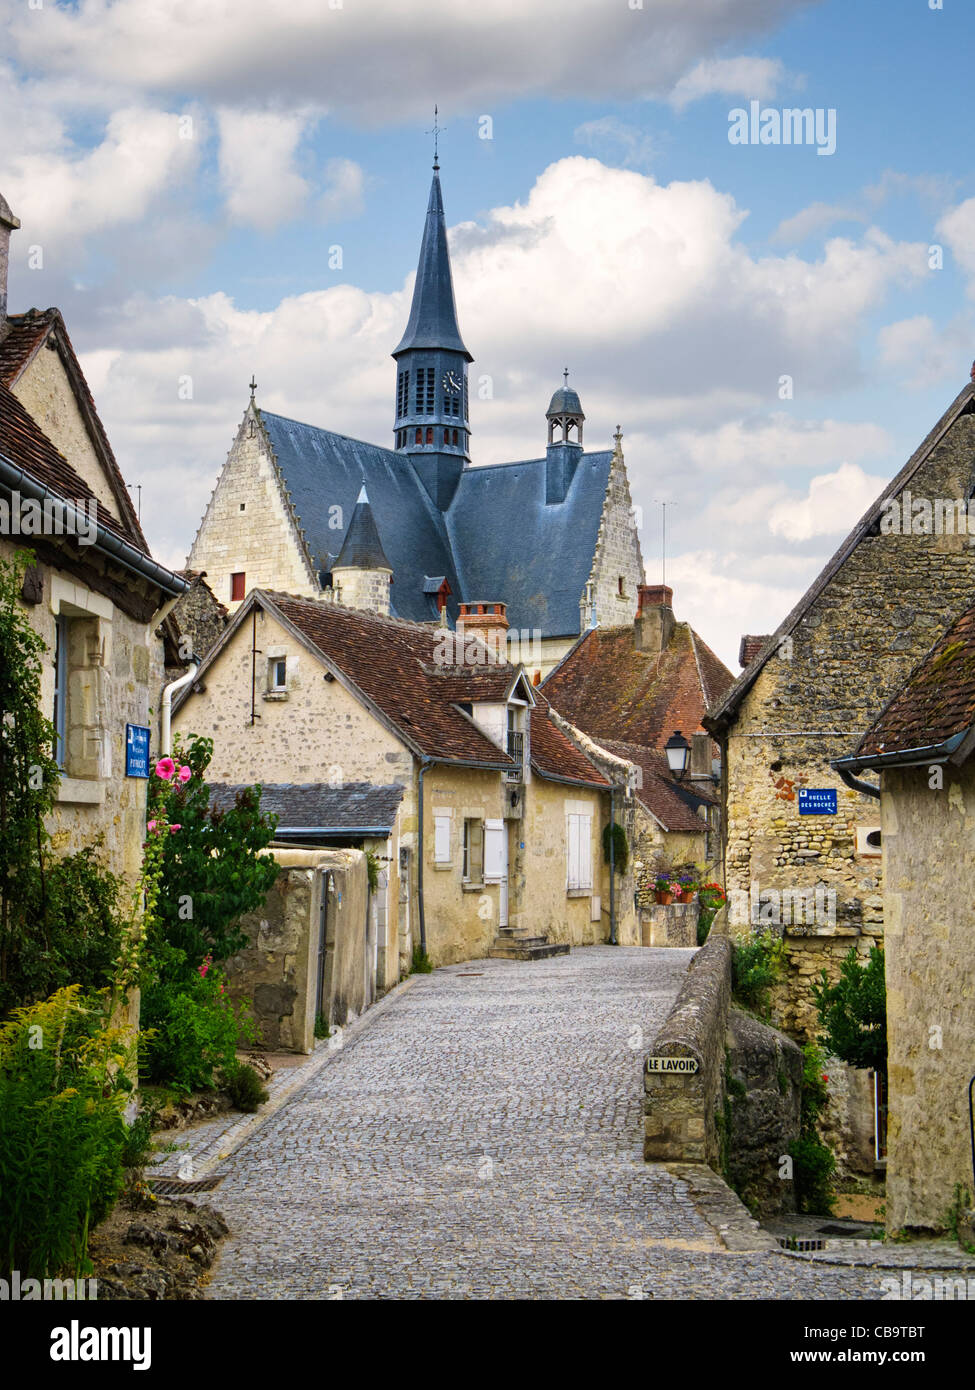 Village, France - Old street and houses in the pretty village of Montresor in Loire Valley, France Stock Photo